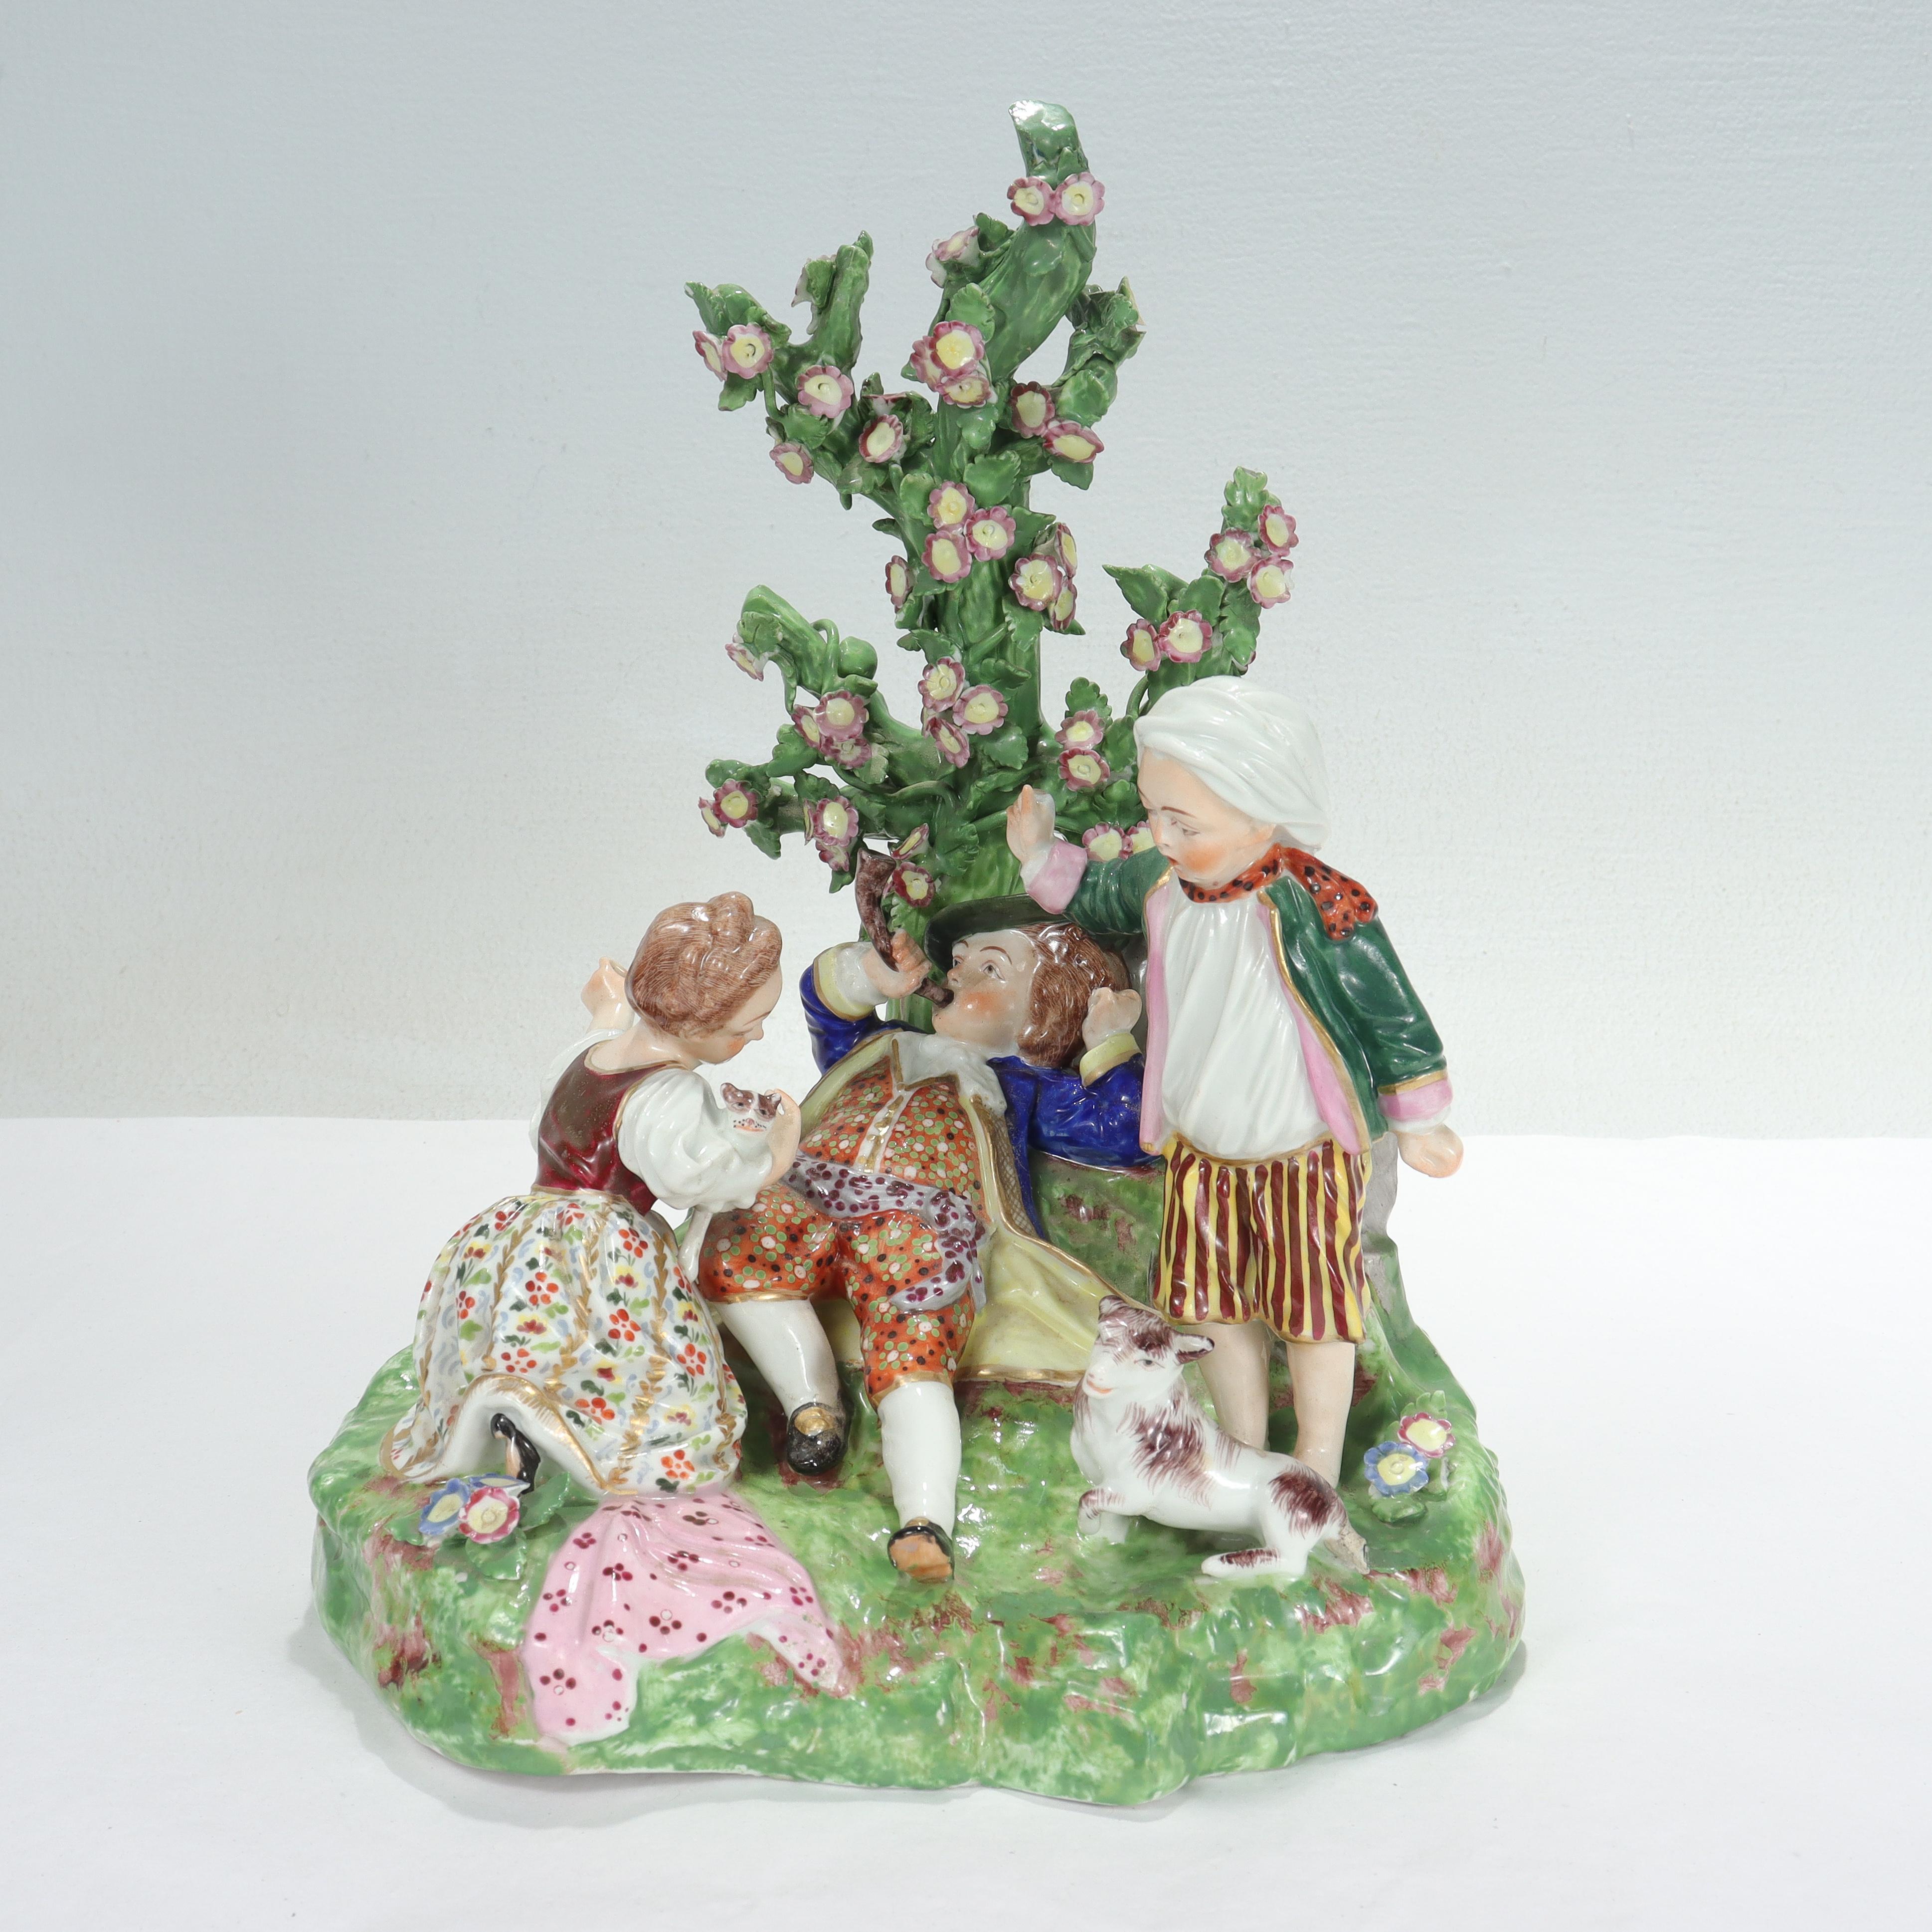 A fine antique English porcelain figurine.

By the Derby Porcelain Works.

With 3 children in a garden accompanied by a lamb and a cat. 

The boy is reclining against a tall flowery plant and holding a pipe or scoop in his hand.

Simply a